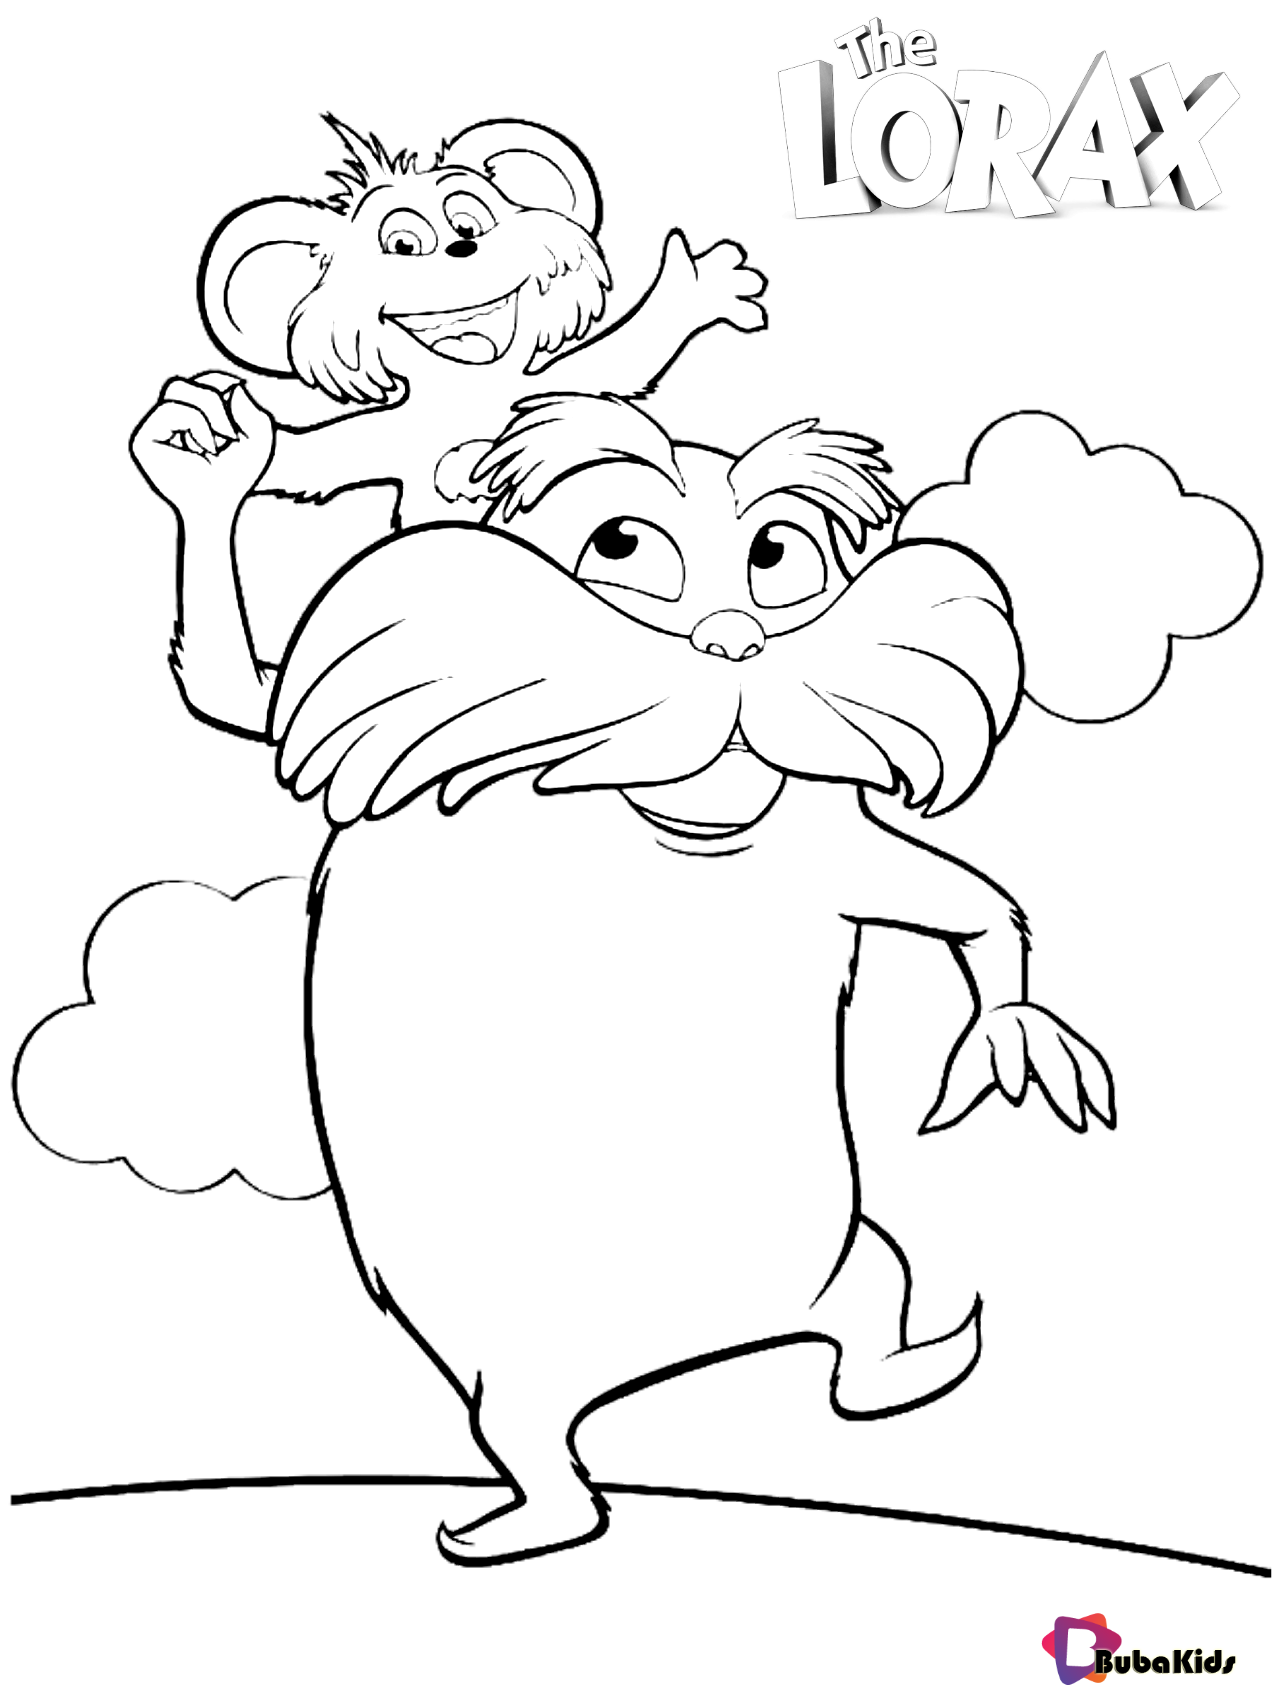 Dr seuss the lorax coloring pages Wallpaper